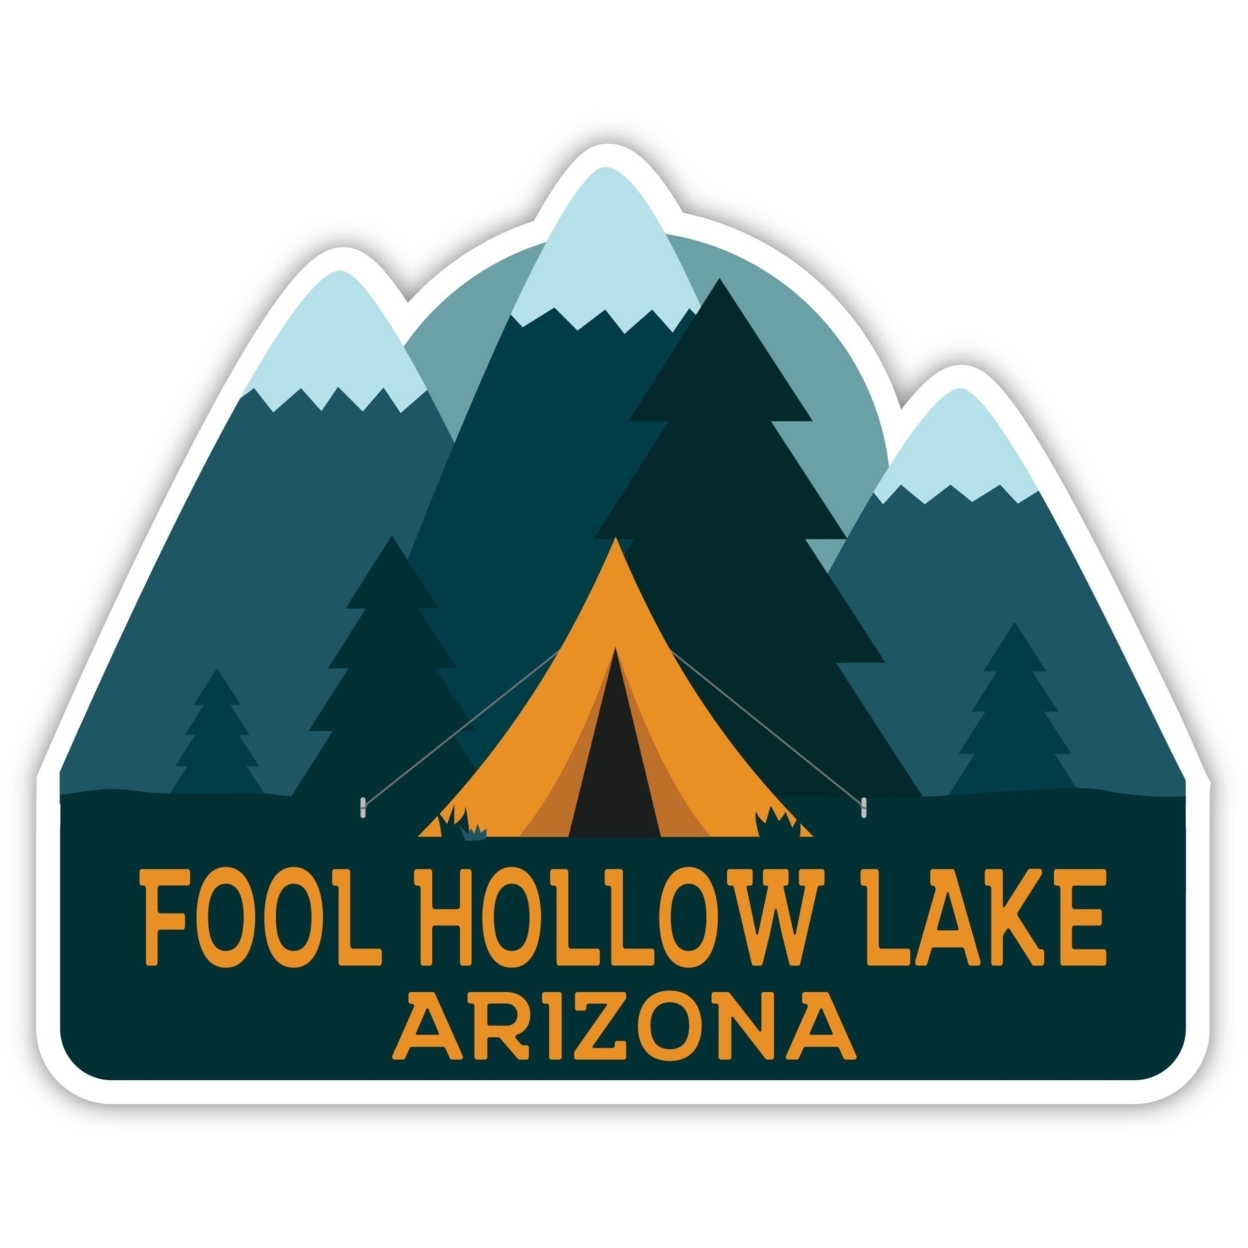 Fool Hollow Lake Arizona Souvenir Decorative Stickers (Choose Theme And Size) - Single Unit, 8-Inch, Great Outdoors